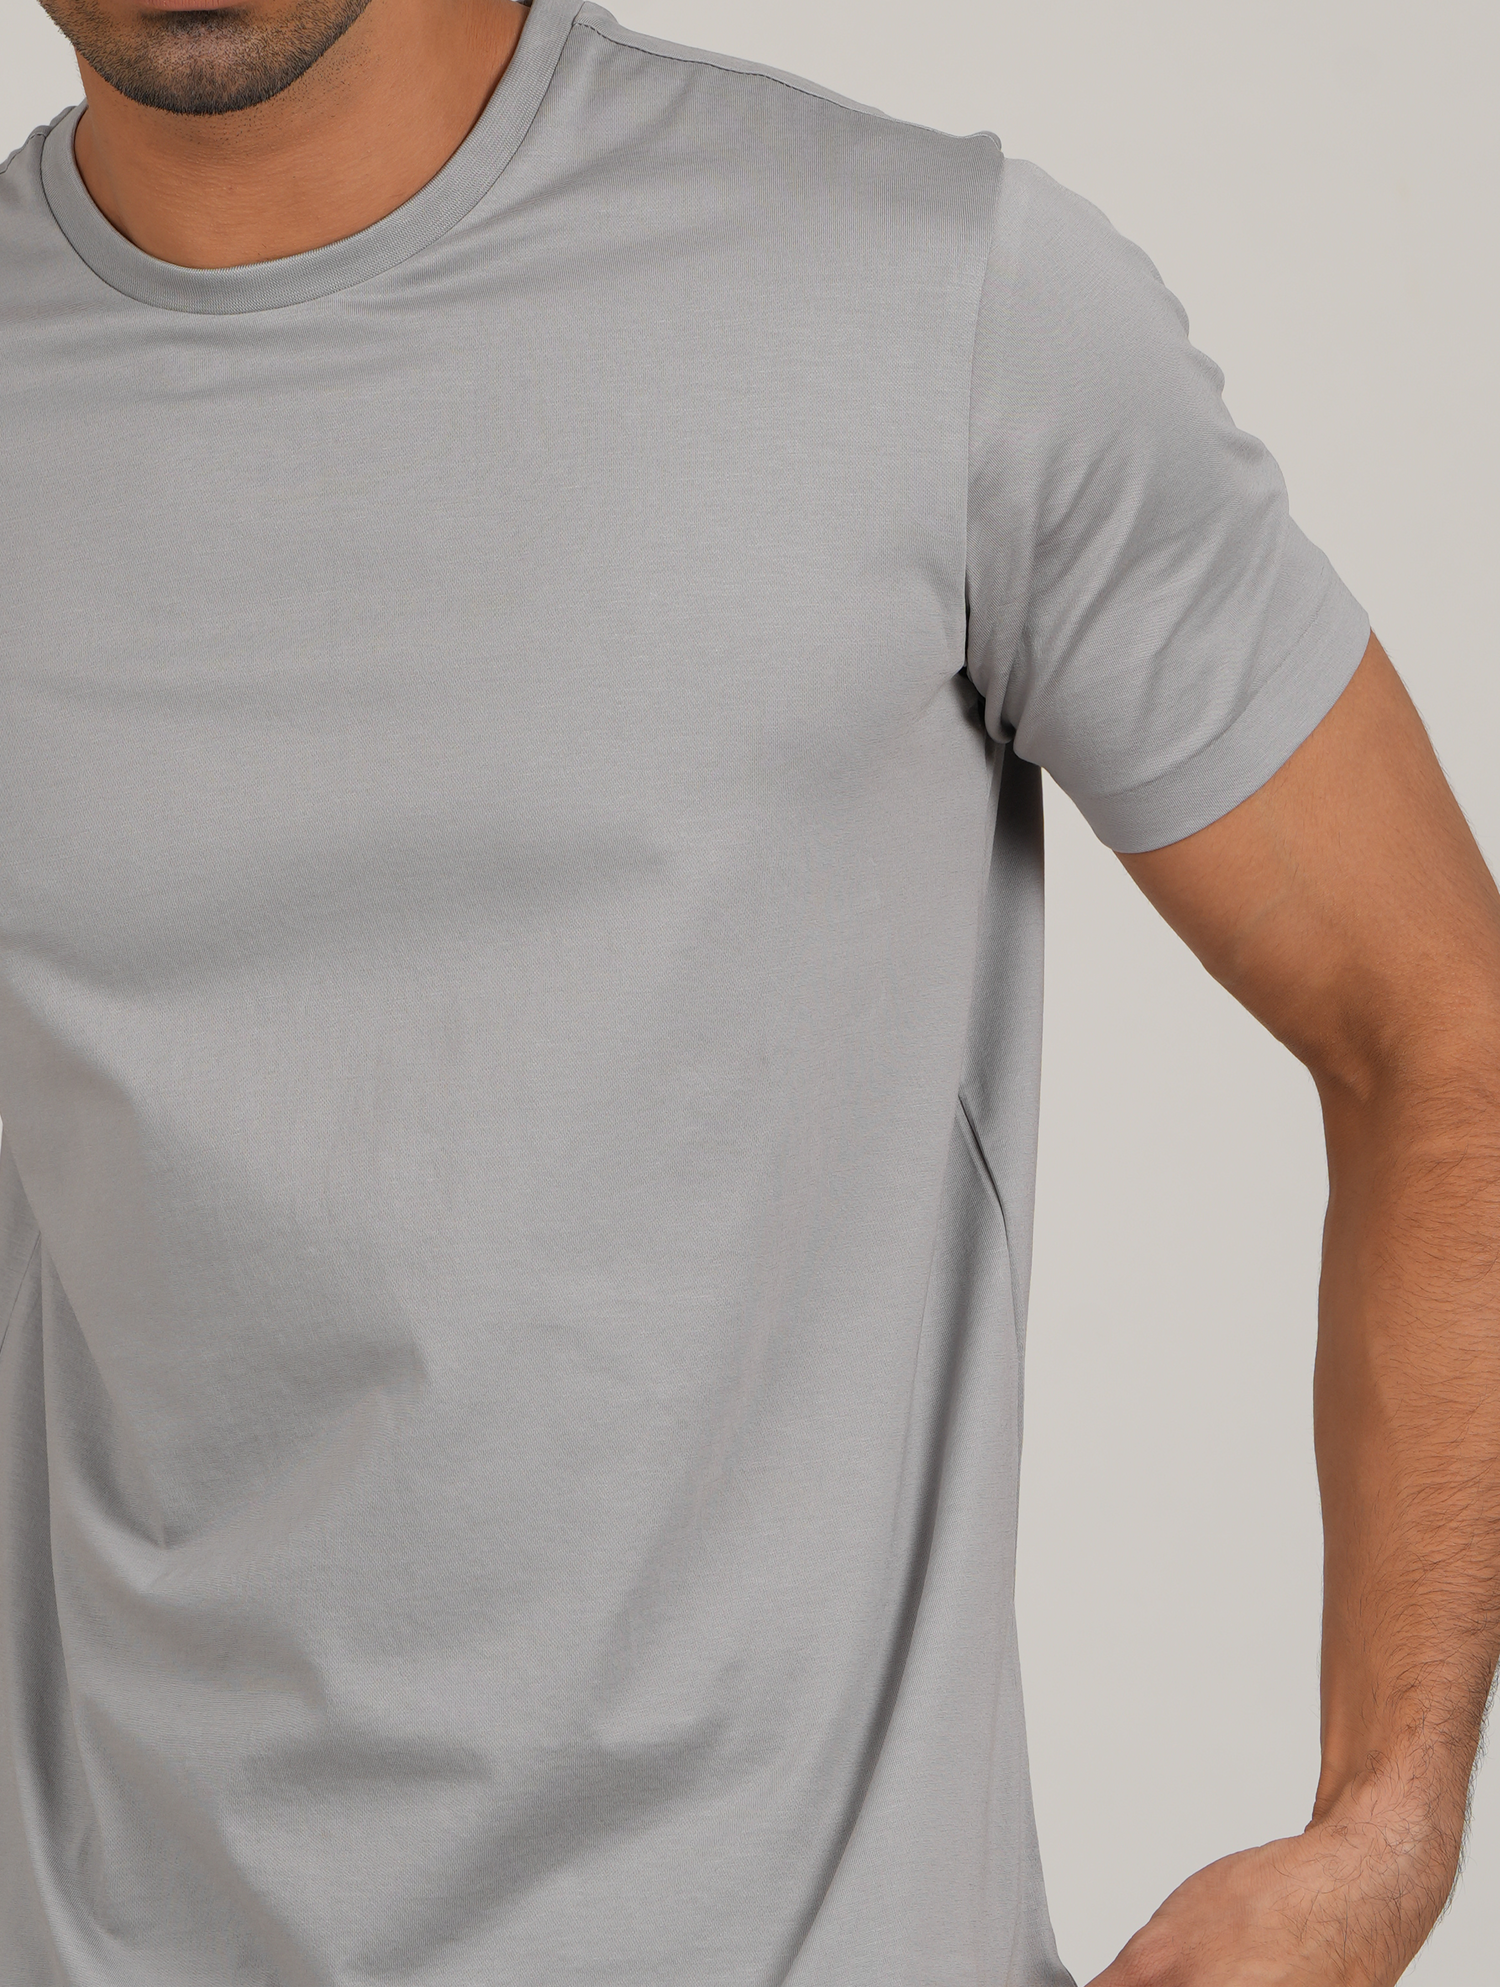 Best Grey T-Shirts for Men